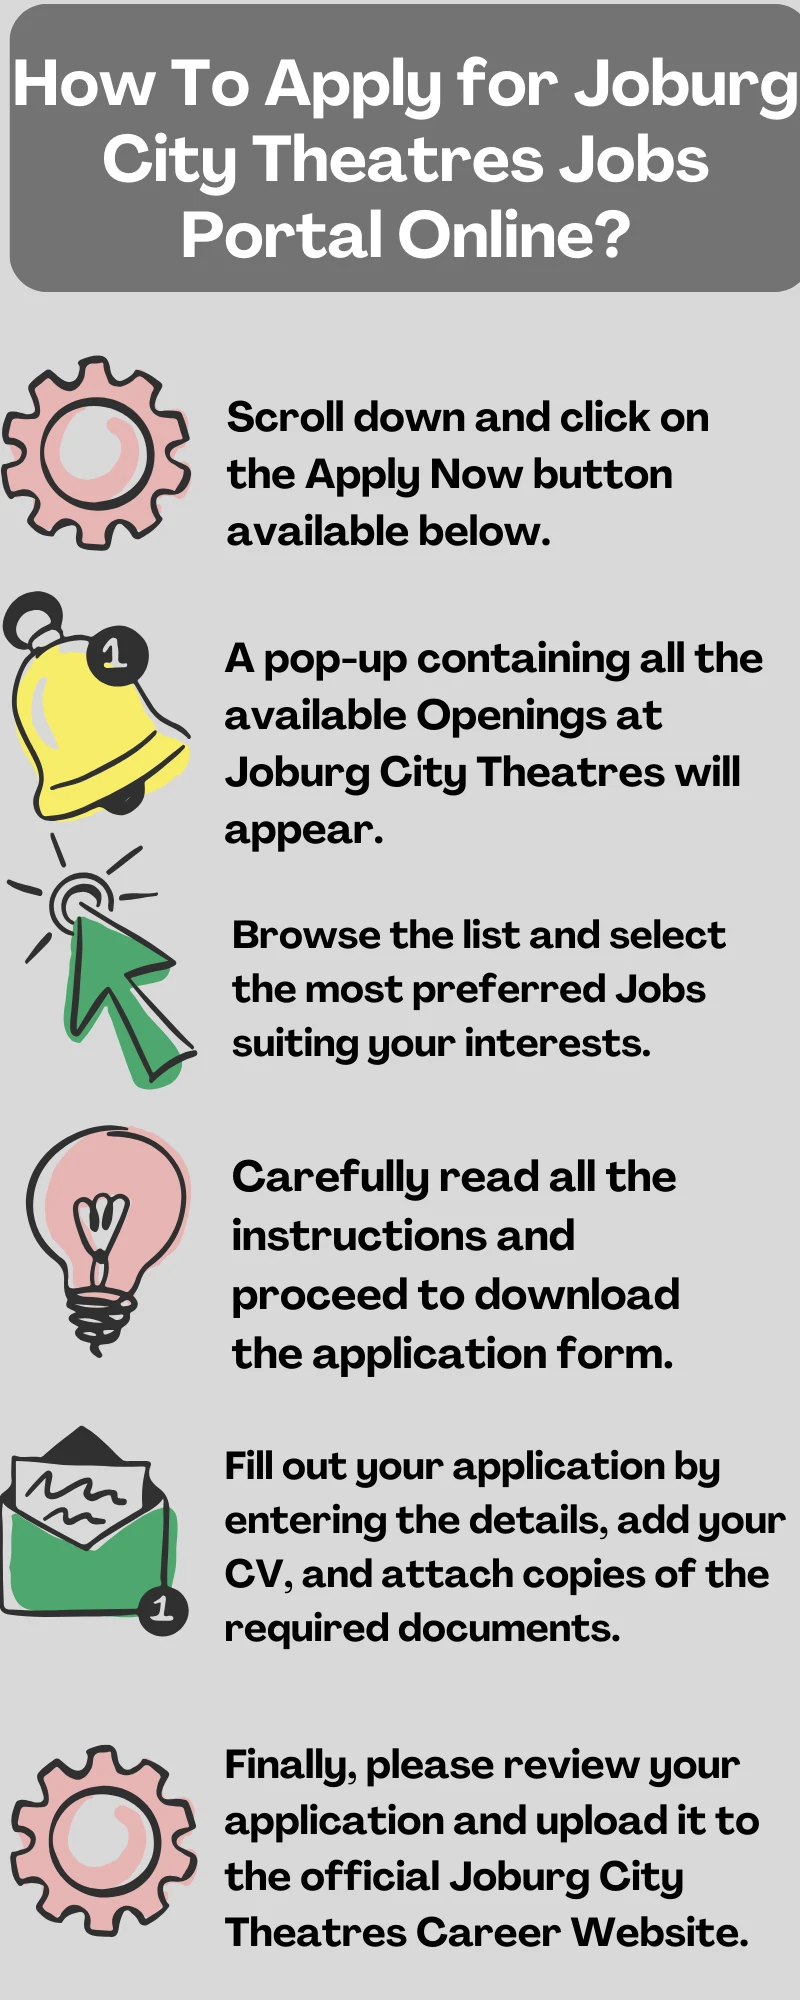 How To Apply for Joburg City Theatres Jobs Portal Online?